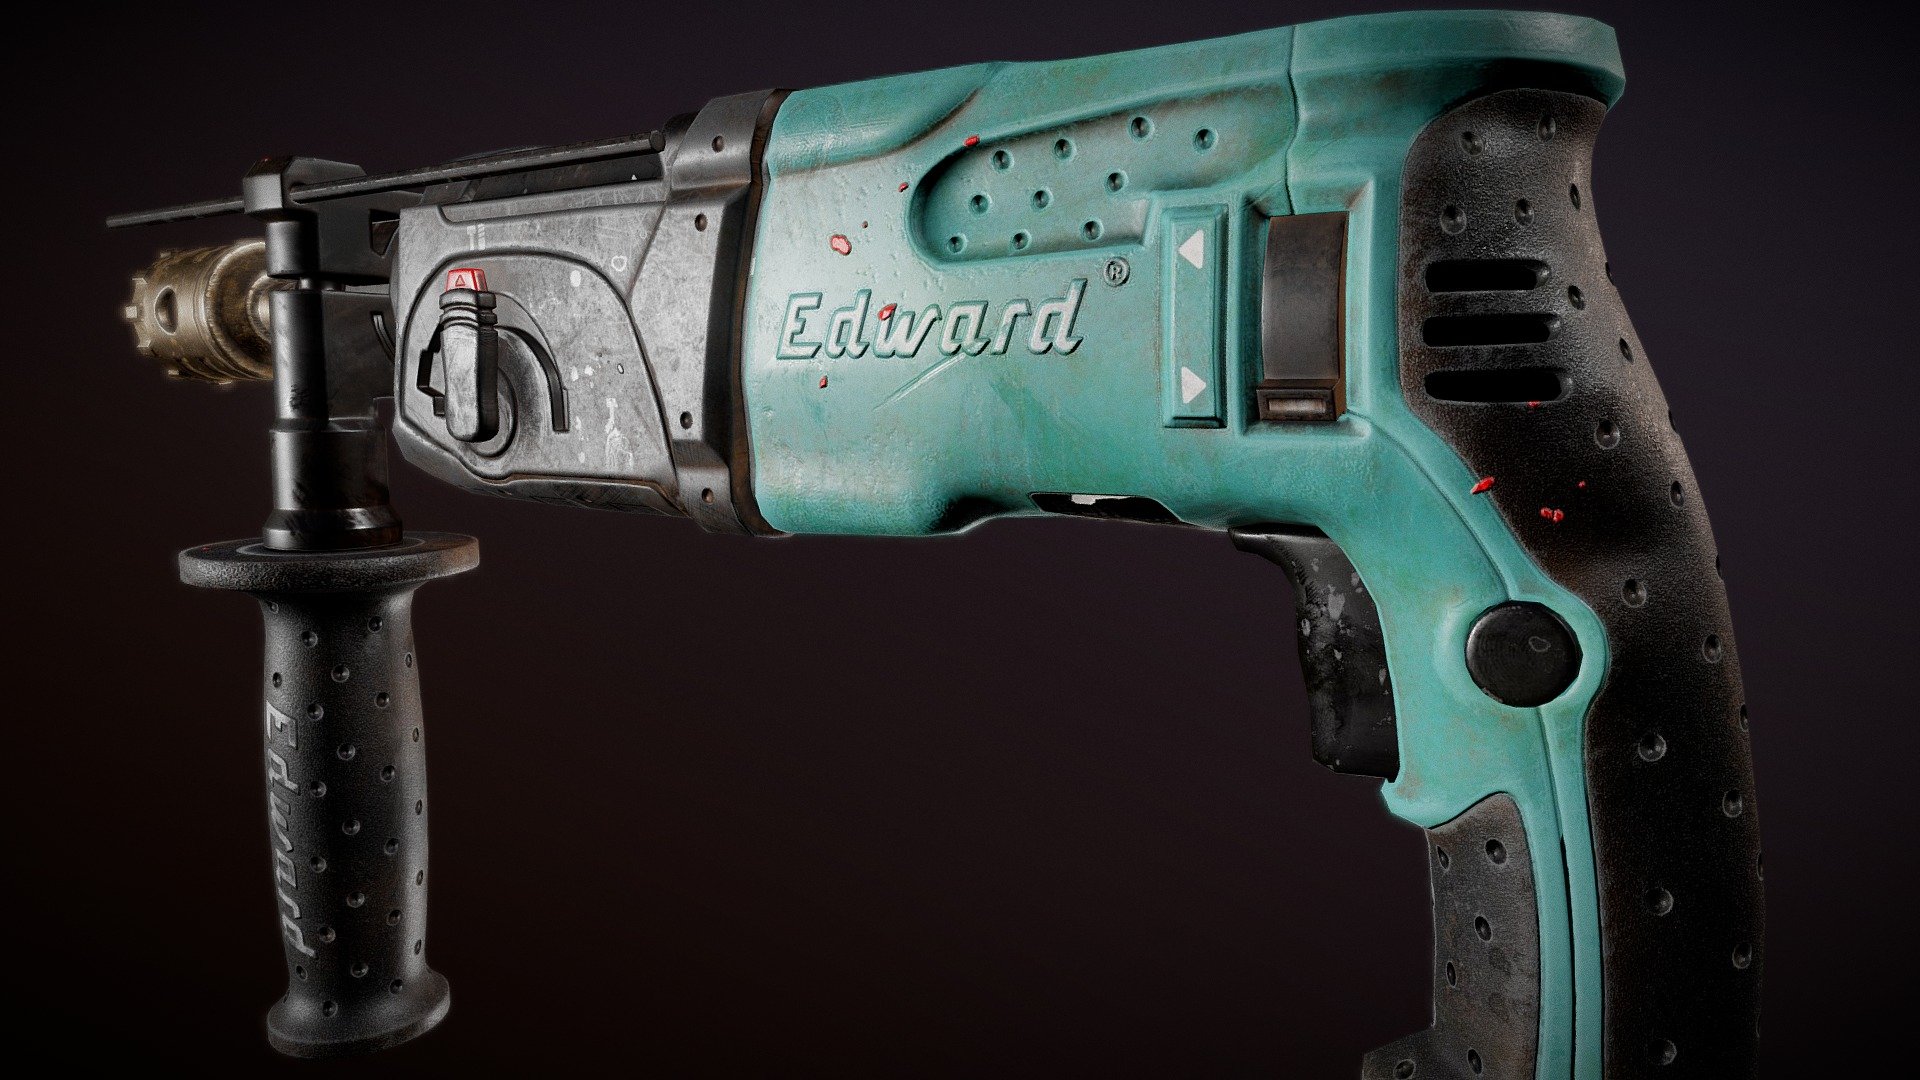 A drill made for my portfolio, using Maya and substance painter 3d model